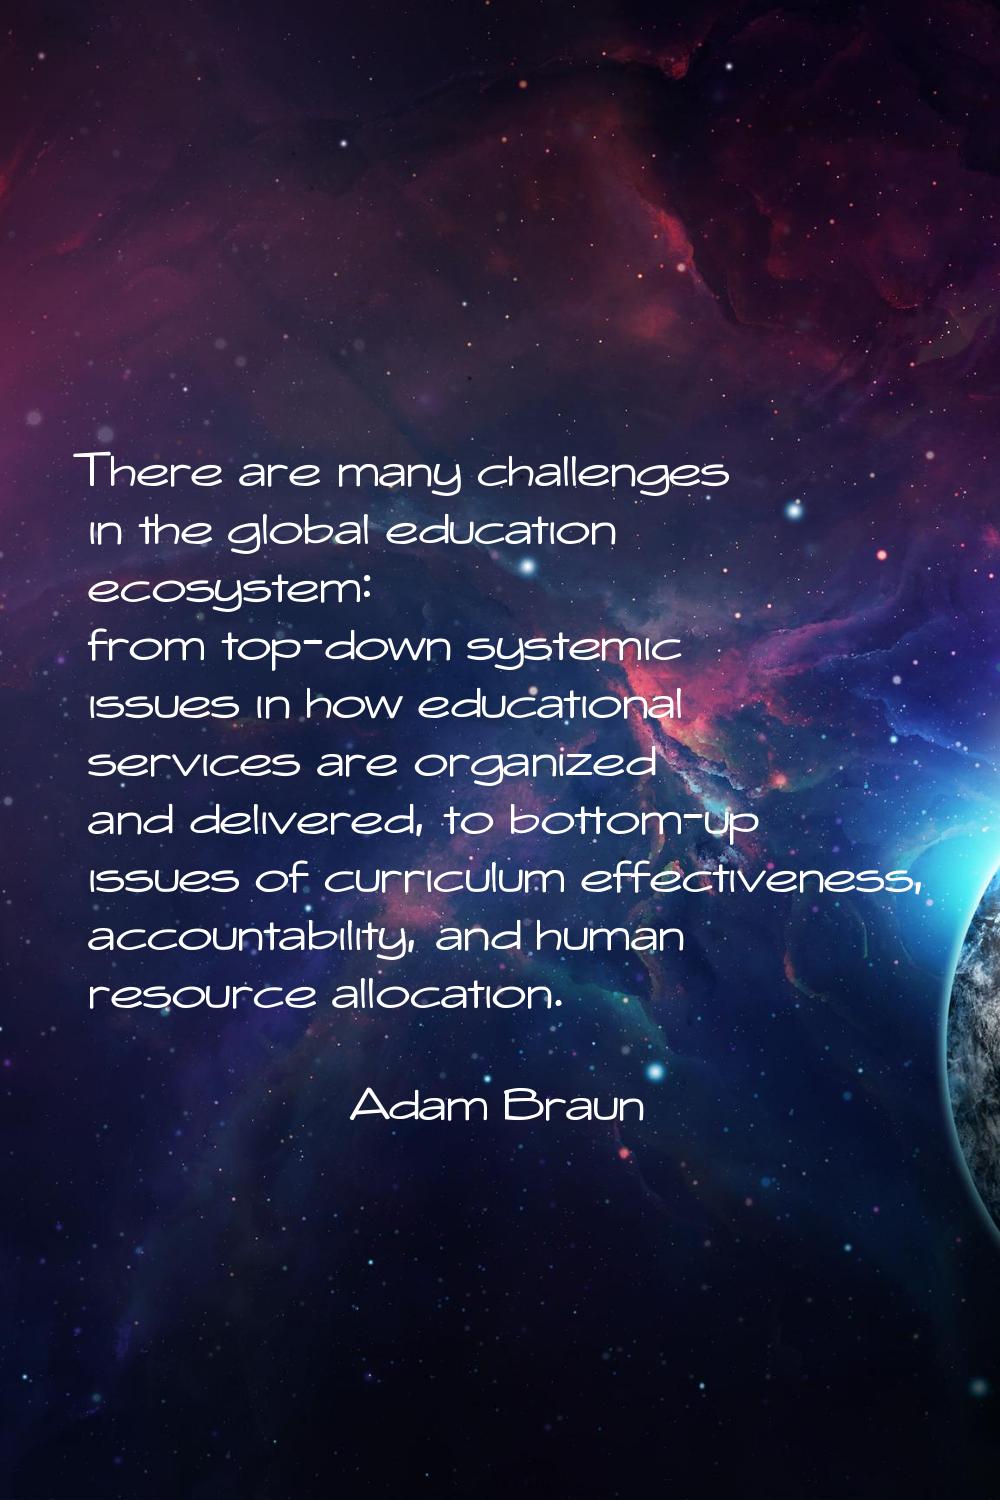 There are many challenges in the global education ecosystem: from top-down systemic issues in how e